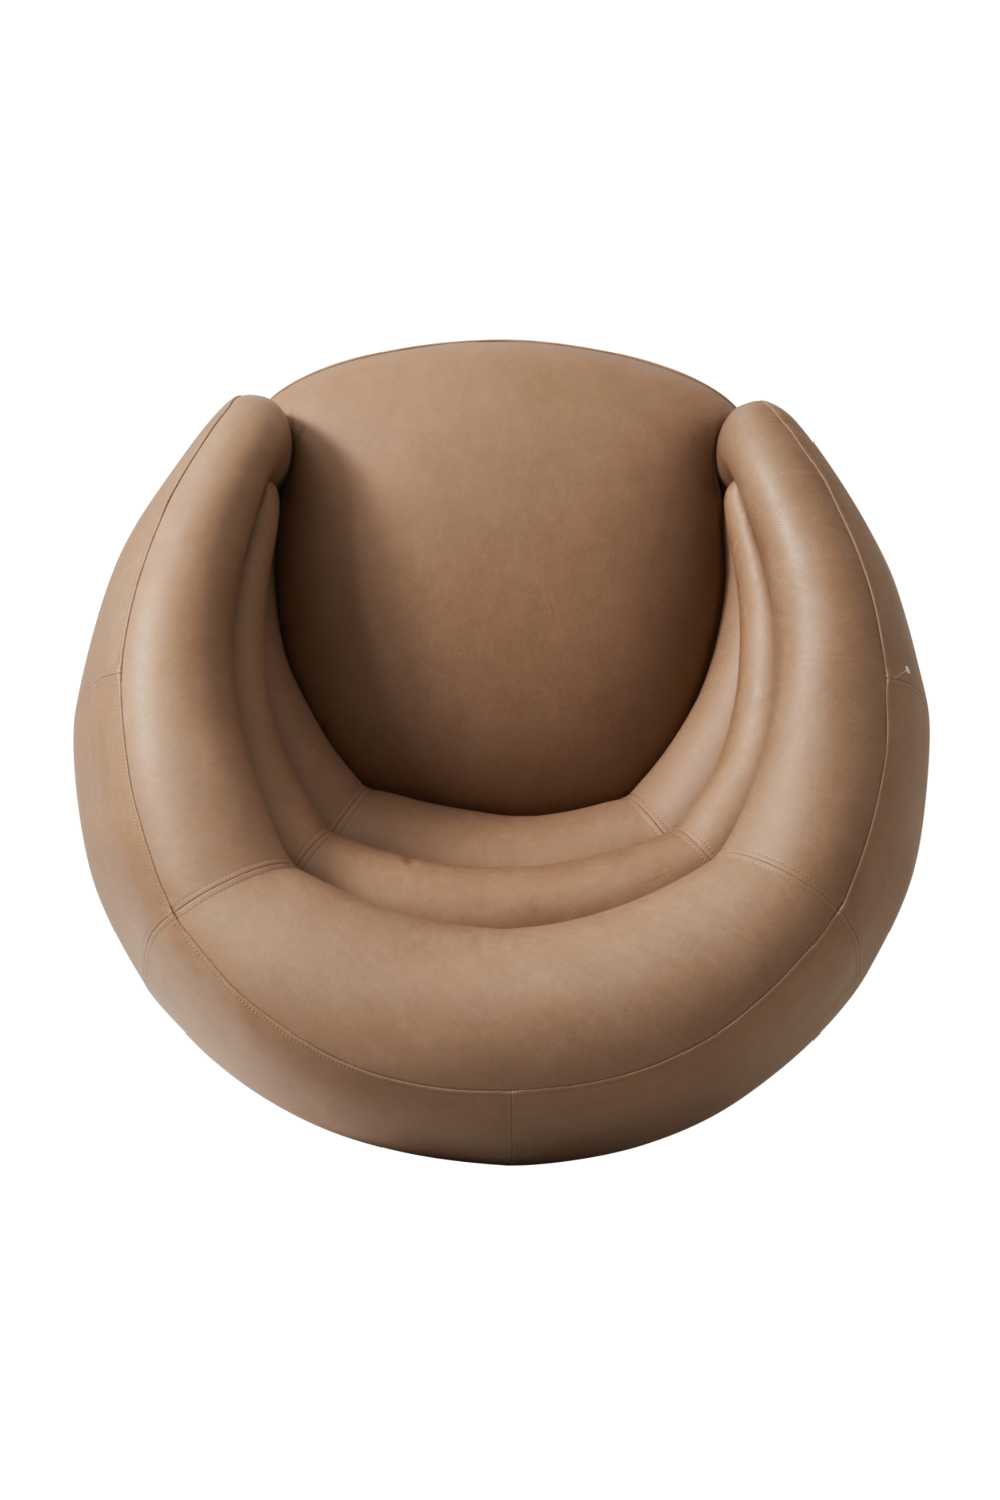 Taupe Leather Swivel Chair | Andrew Martin Haynes | Oroa.com